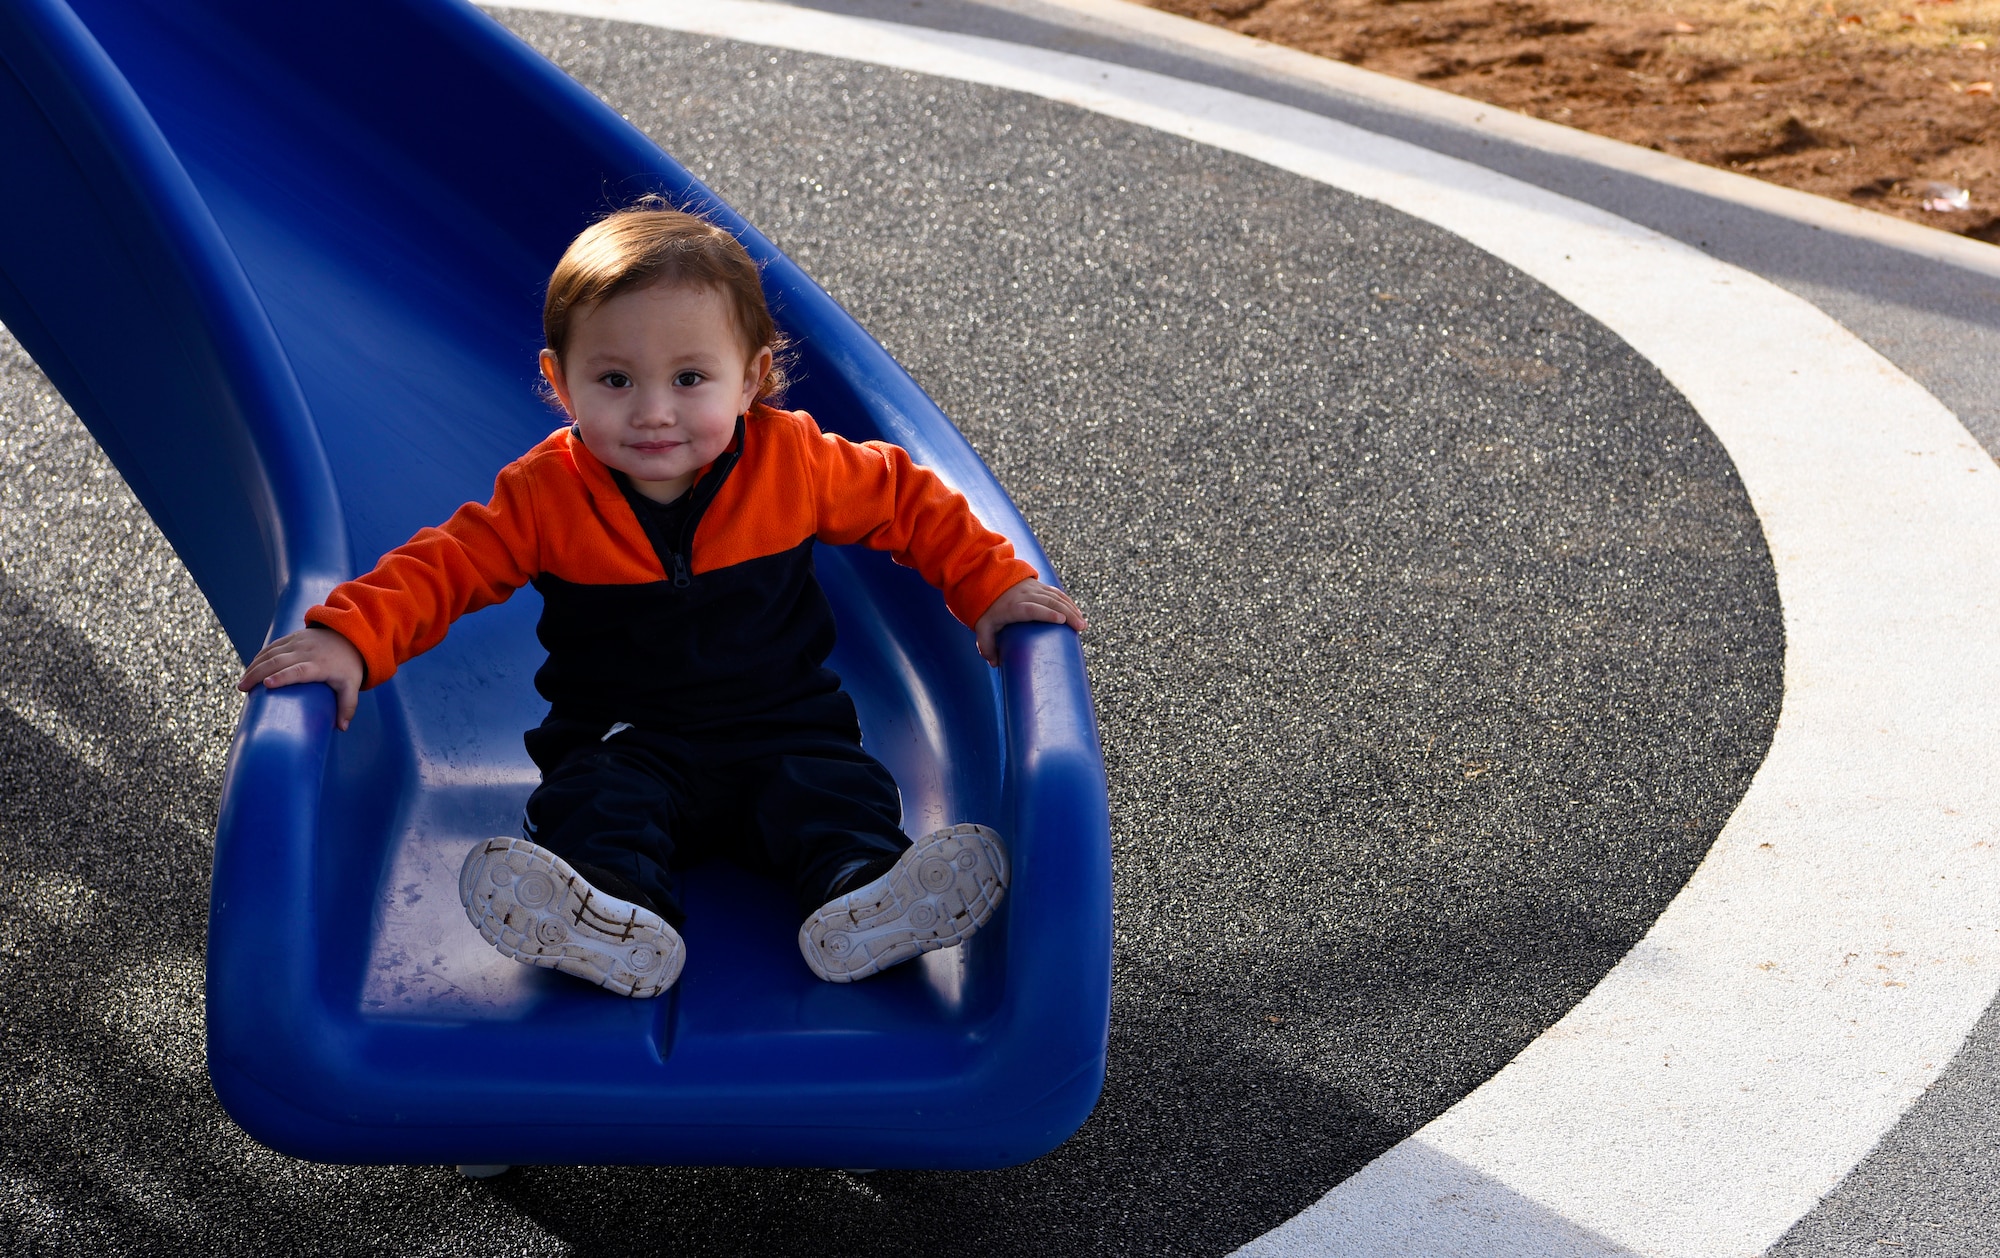 A young Thunderbolt smiles after riding down a slide at the new Fowler Park playground, Jan. 9, 2019, at Luke Air Force Base, Ariz.